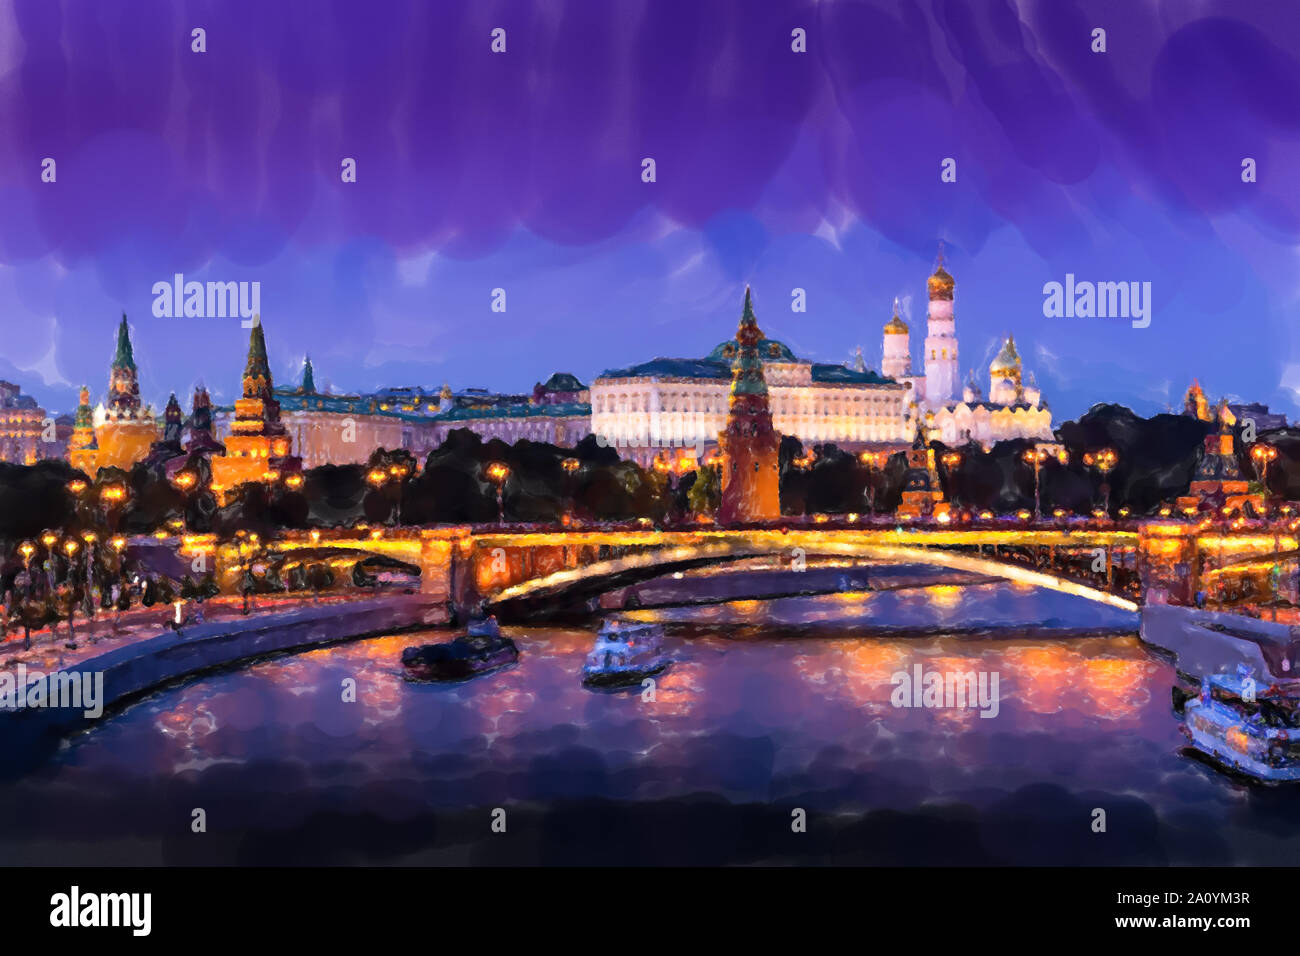 Illuminated Moscow Kremlin, Kremlin Embankment and Moscow River at night in Moscow, Russia. Watercolor style. Stock Photo